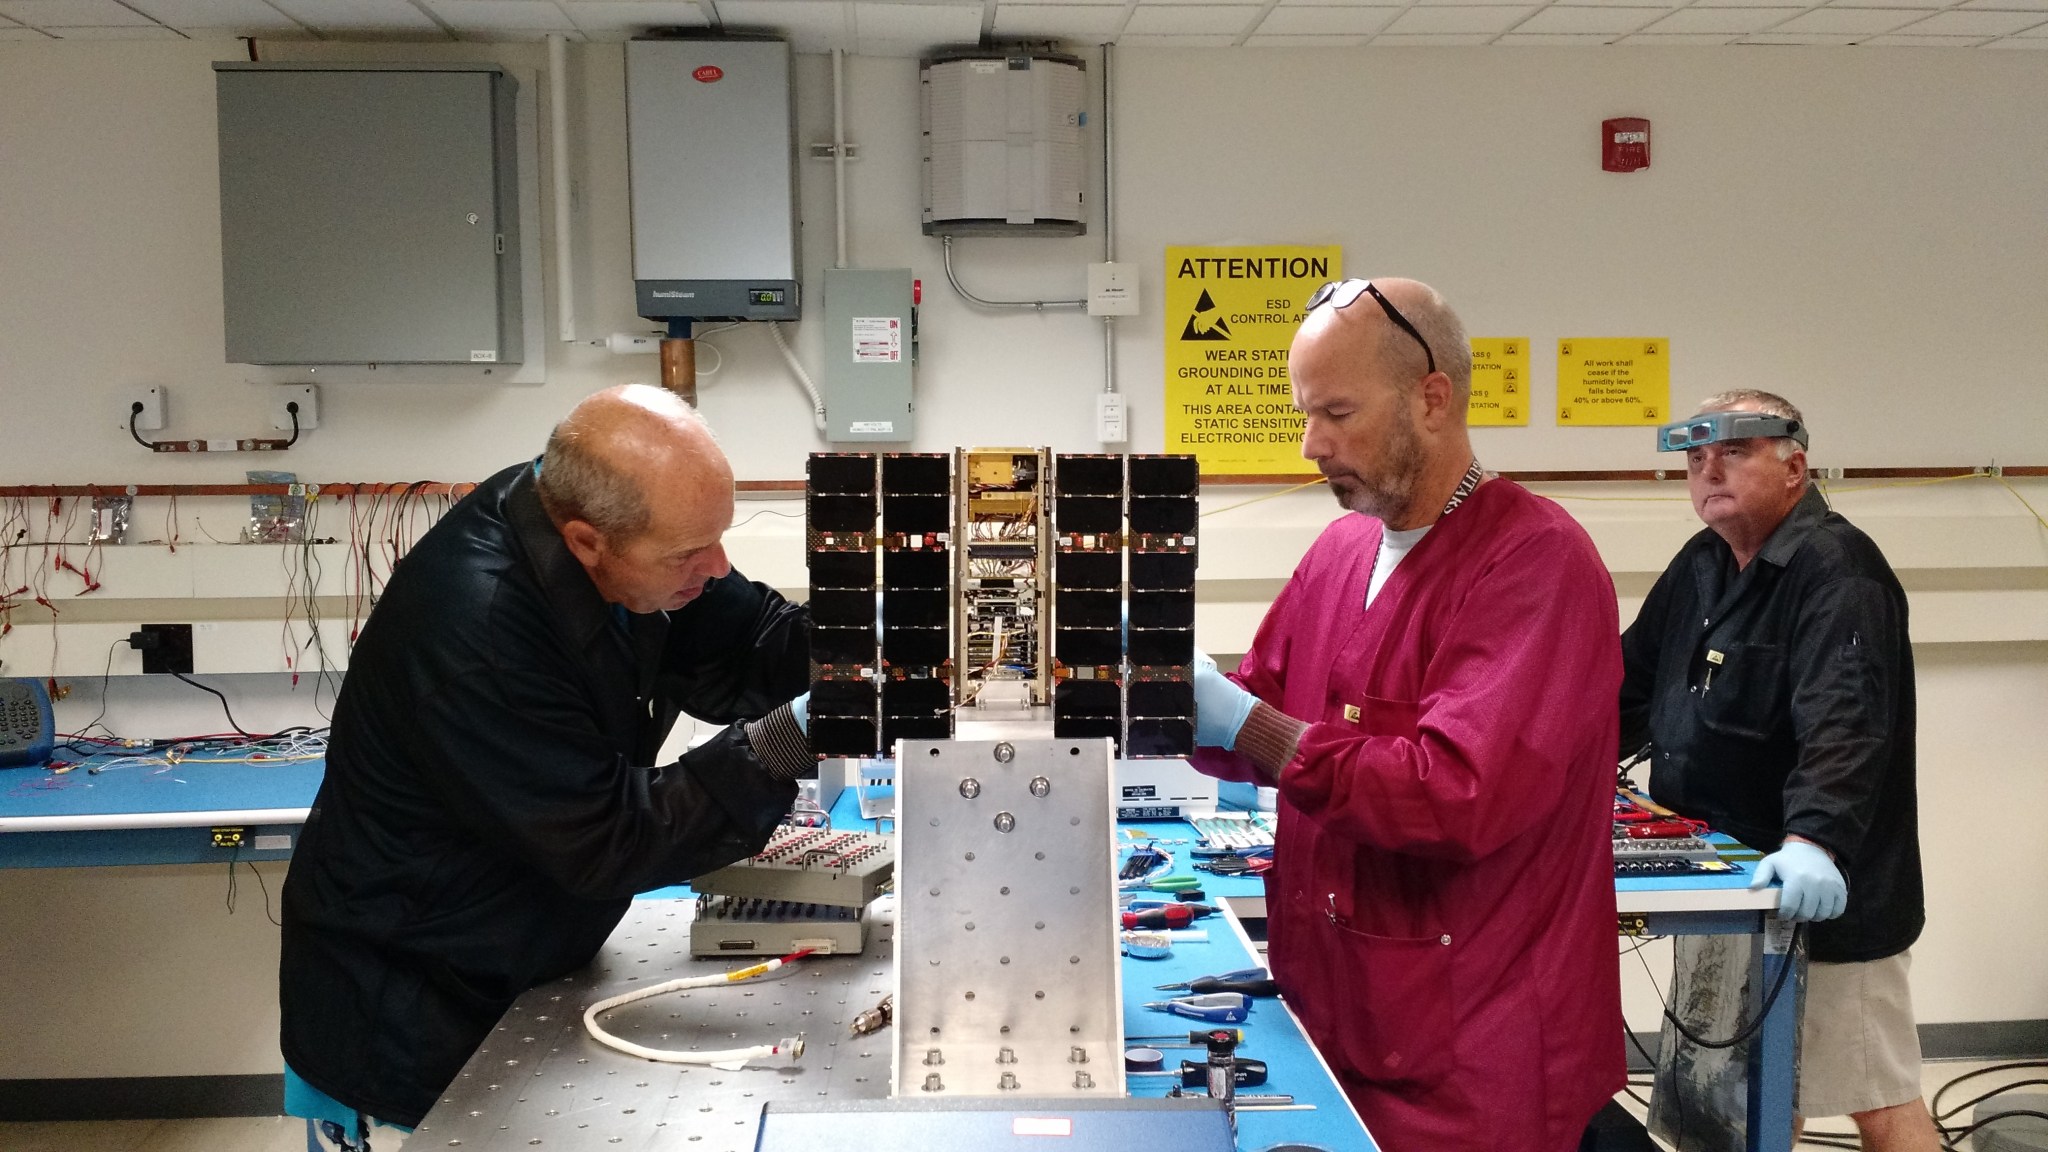 Two people work on the IceCube smallsat, a small open rectangular structure with solar panels on each side. A third person looks on from the background.